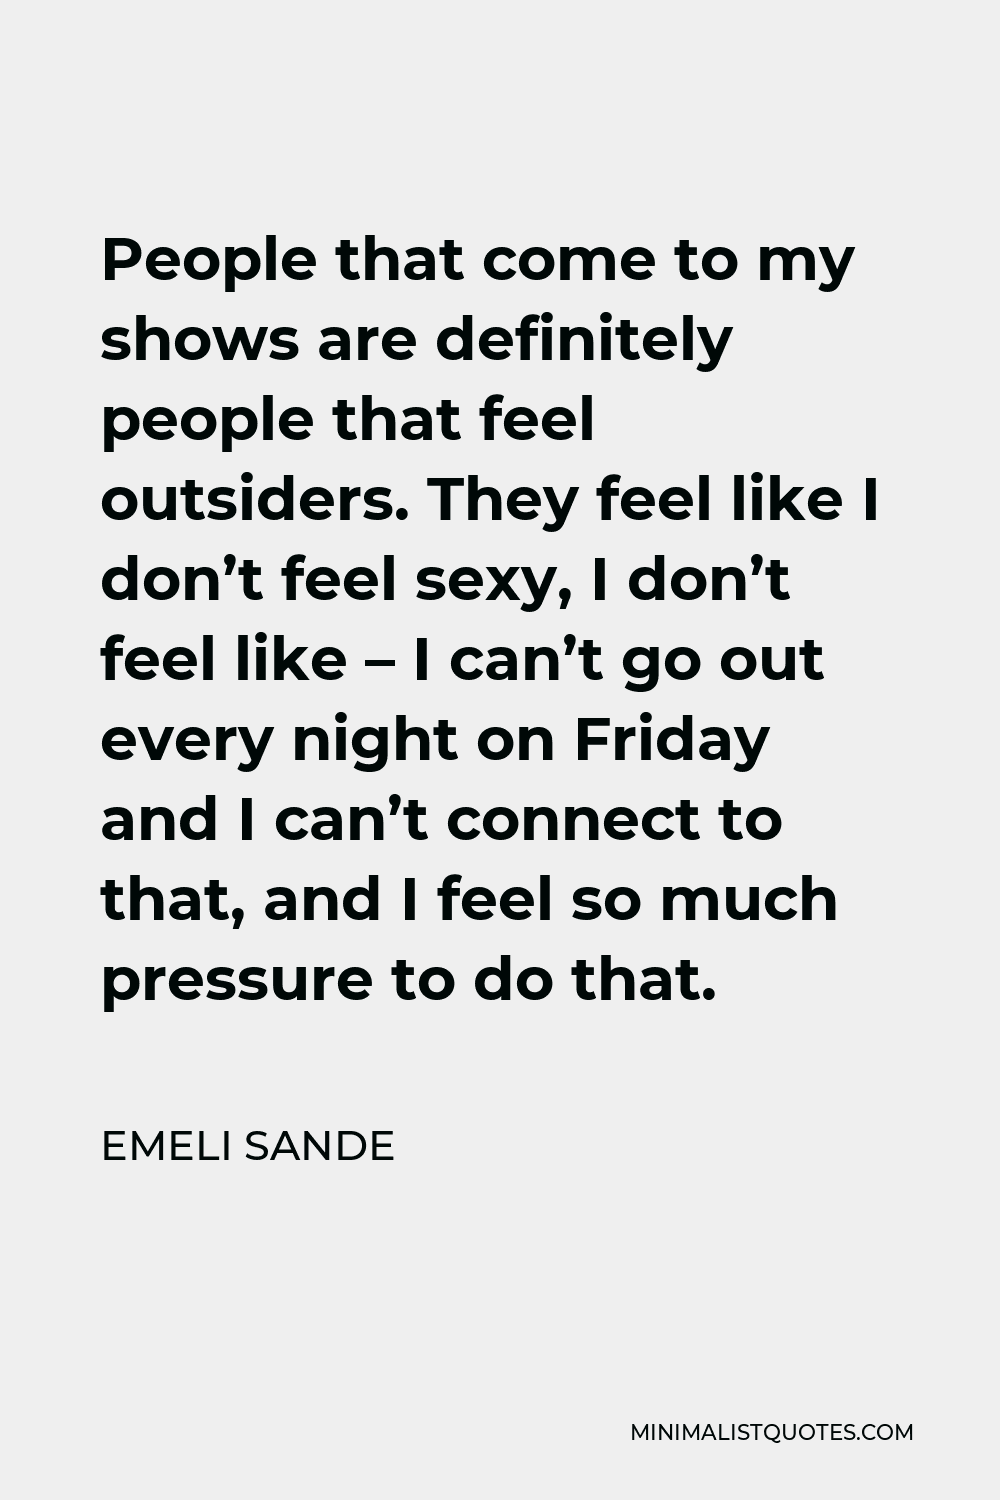 Emeli Sande Quote - People that come to my shows are definitely people that feel outsiders. They feel like I don’t feel sexy, I don’t feel like – I can’t go out every night on Friday and I can’t connect to that, and I feel so much pressure to do that.